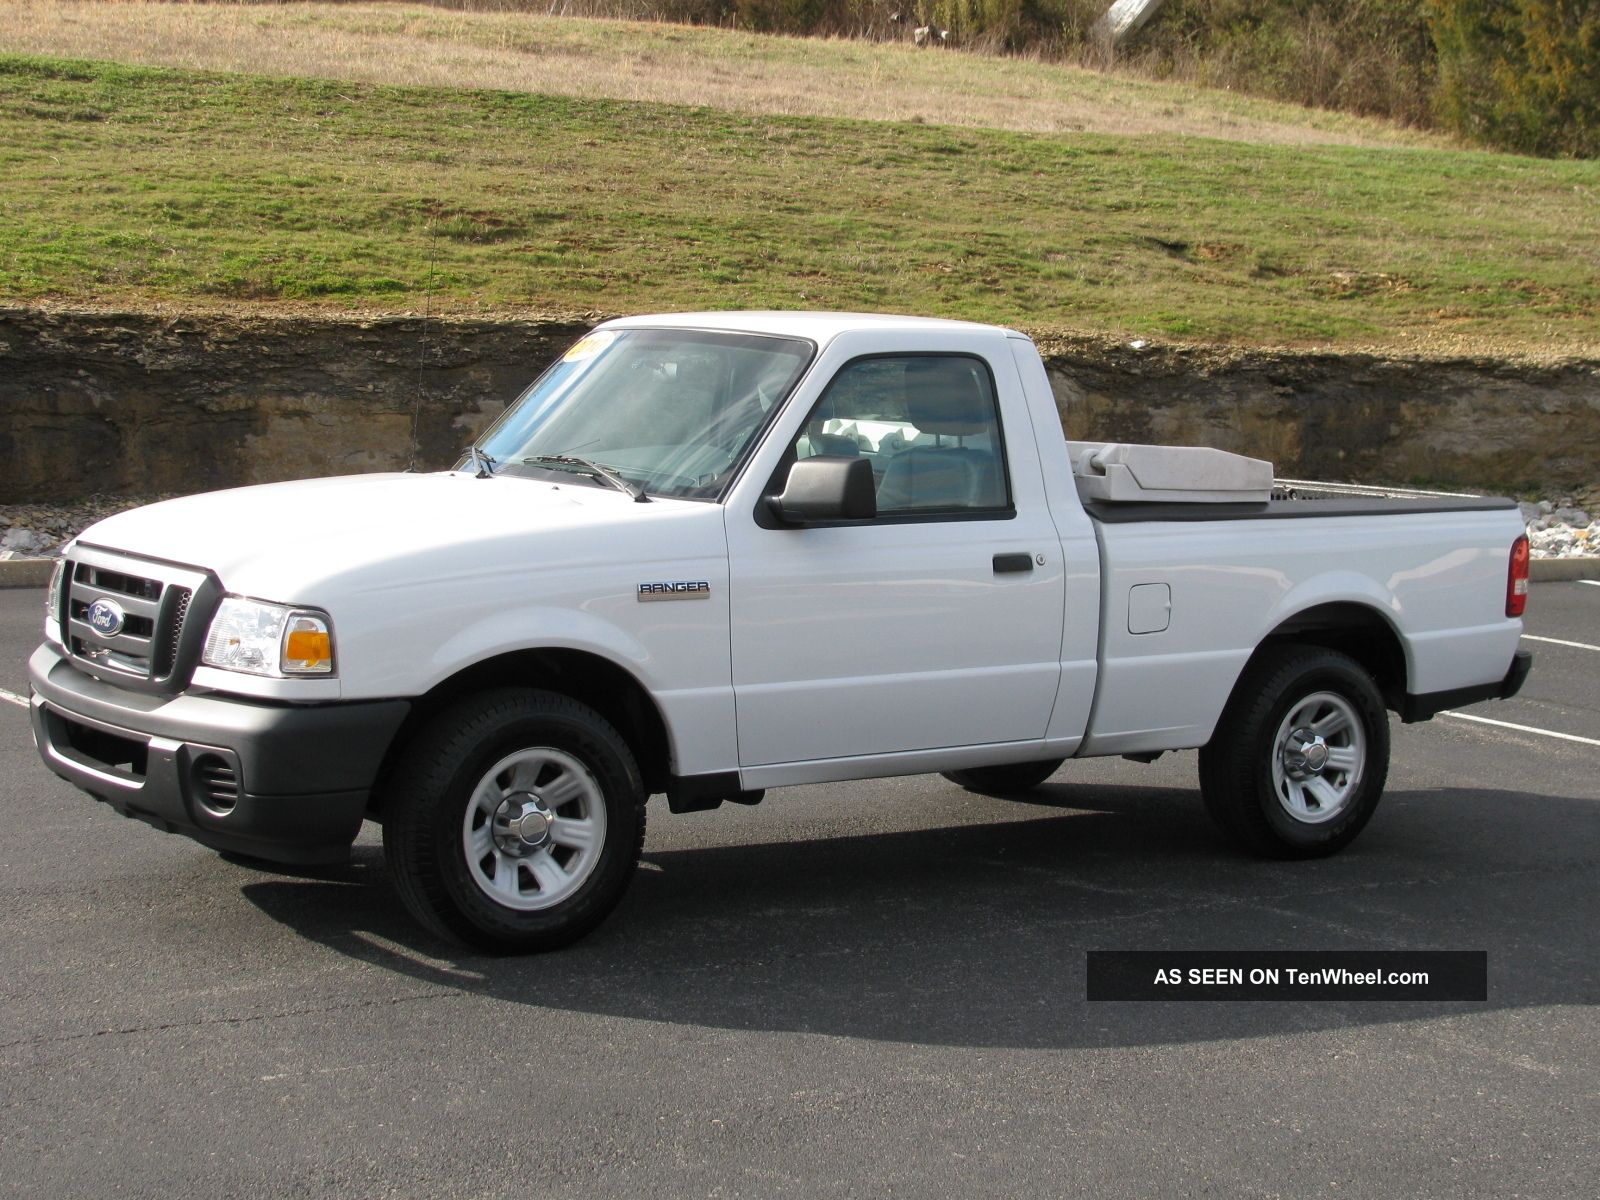 2010 Ford ranger tool boxes